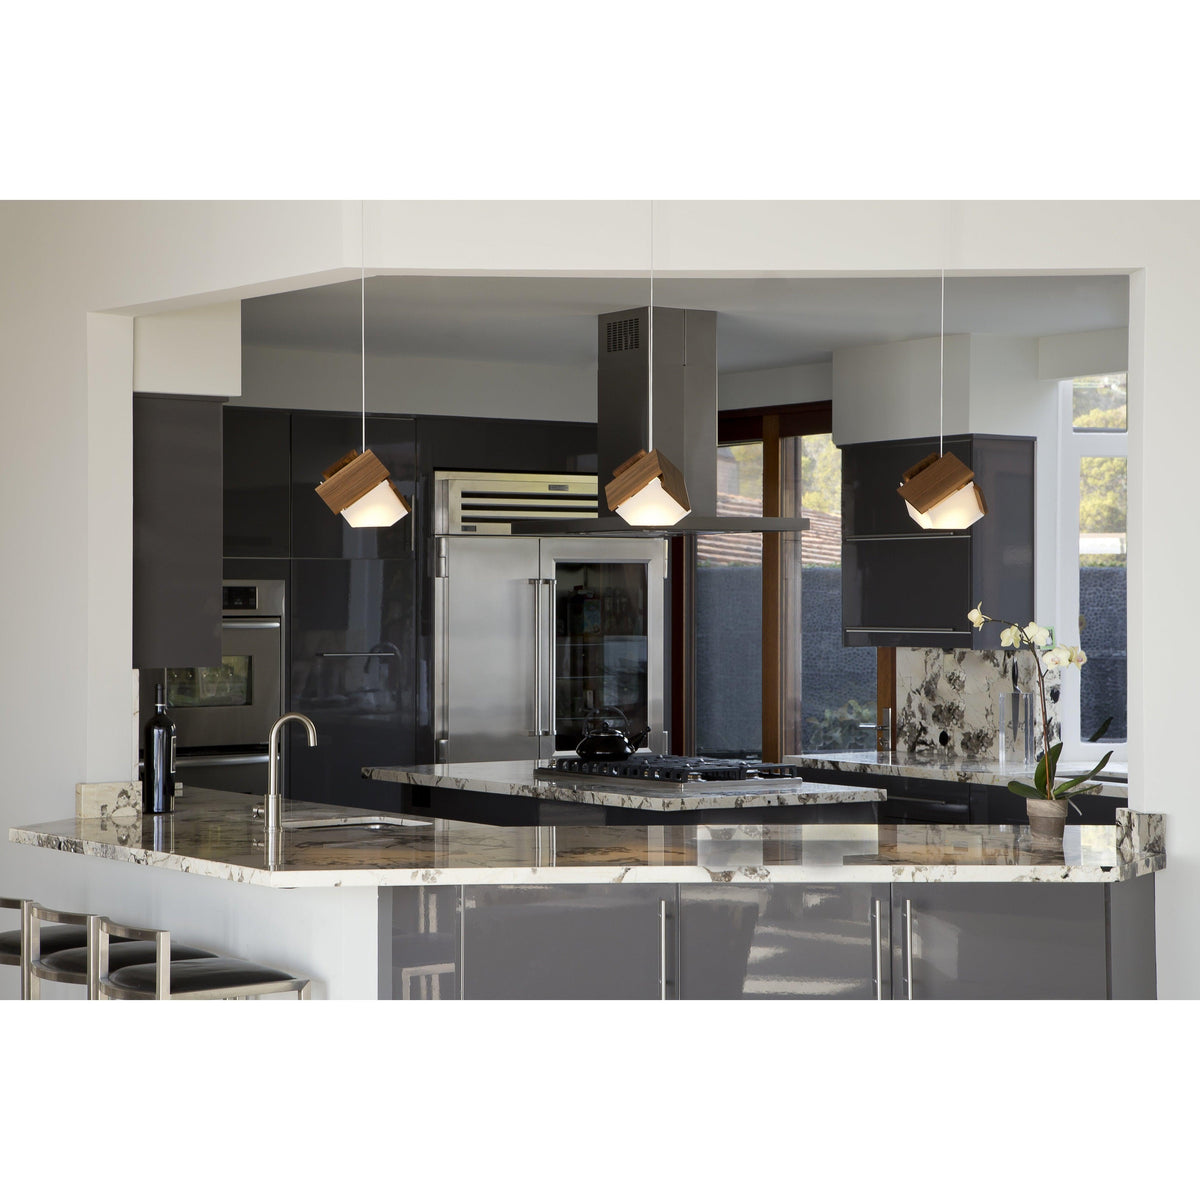 Cerno - Mica LED Accent Pendant - 06-160-D-27P1 | Montreal Lighting & Hardware